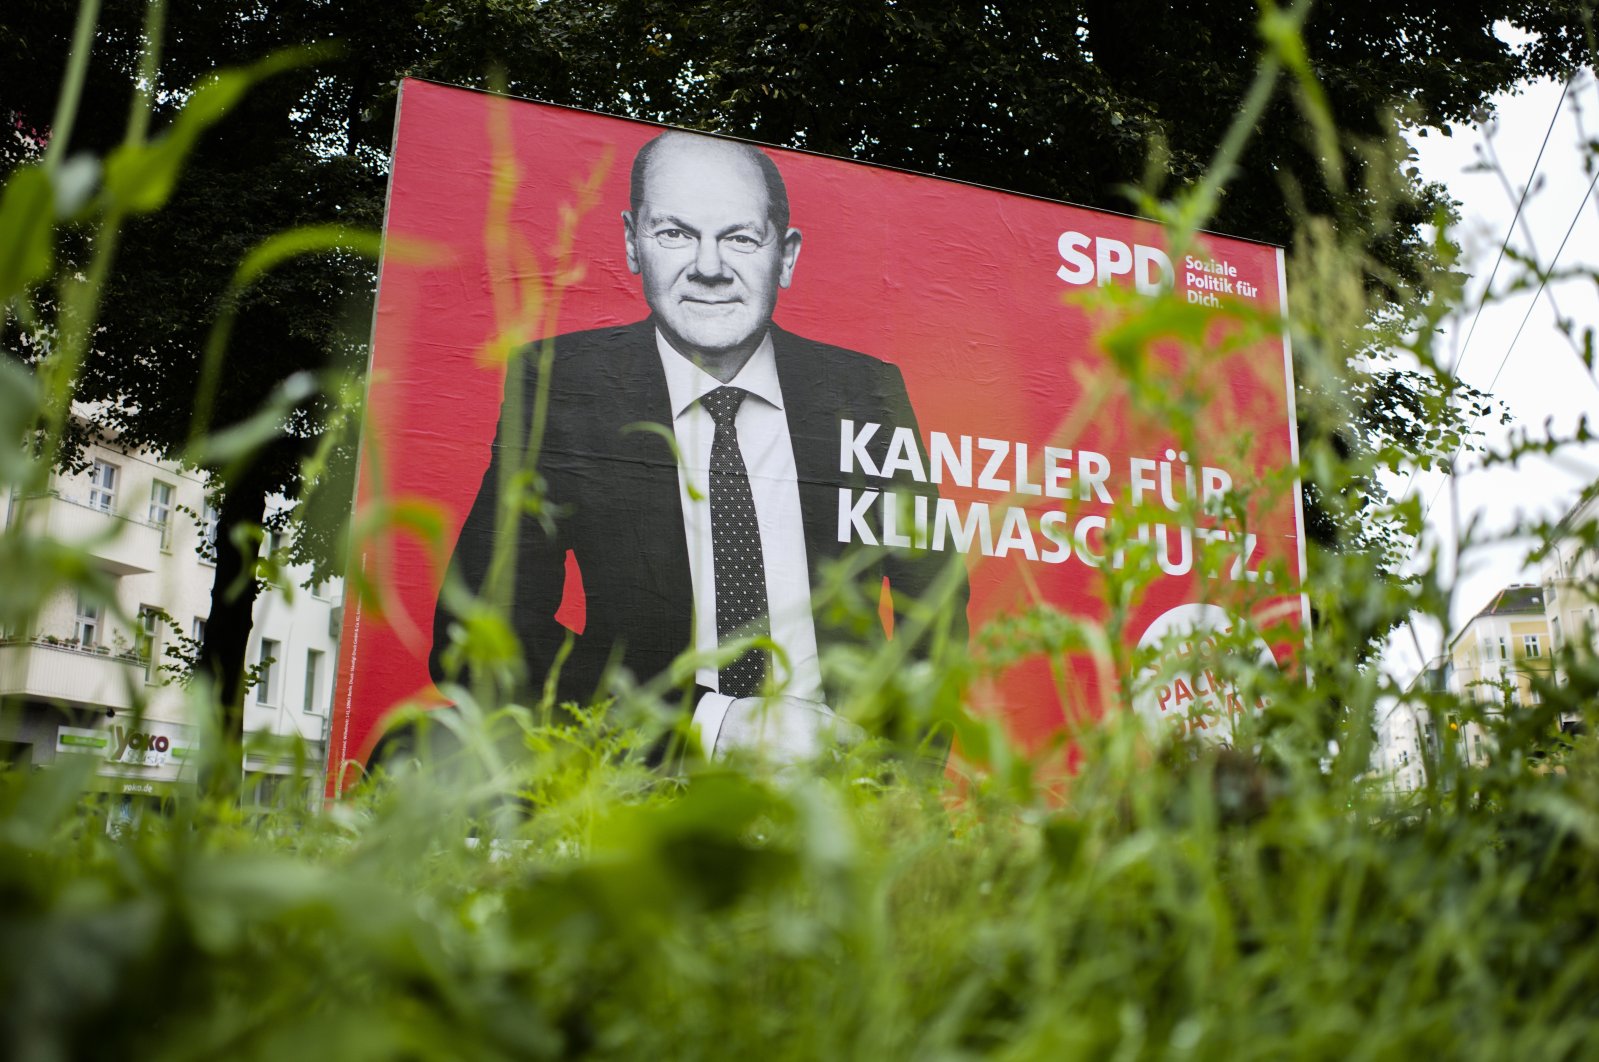 The SPD candidate for chancellor Olaf Scholz is displayed on an election campaign poster reading: “Chancellor for climate protection”, near a street in Berlin, Germany, Aug. 30, 2021. (AP Photo)